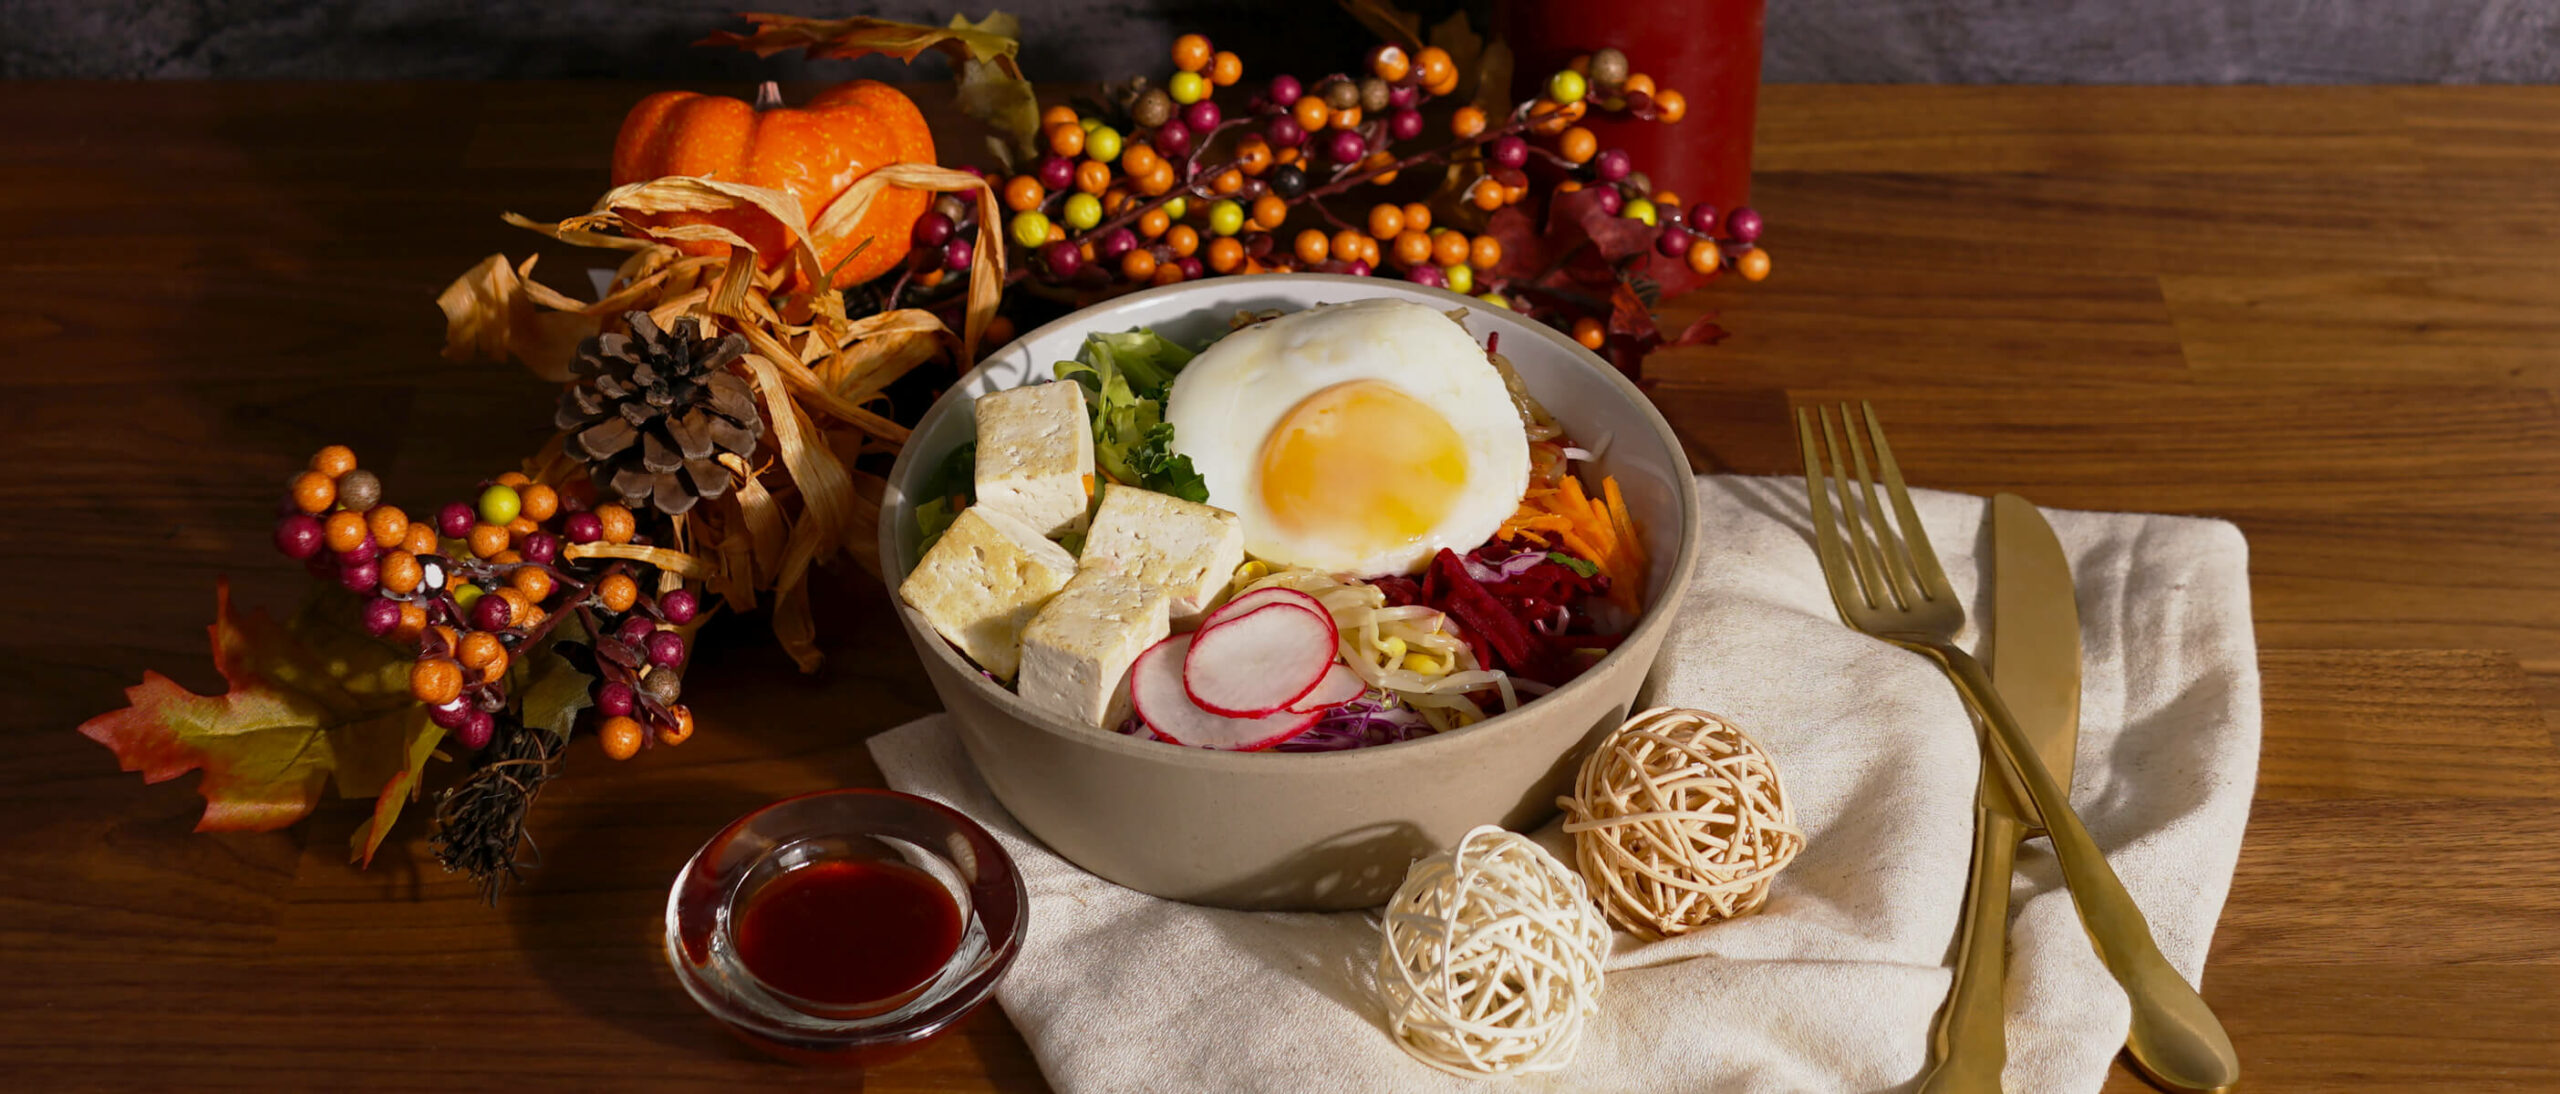 6 Cheap, Quick, and Healthy Lunch Ideas for Fall